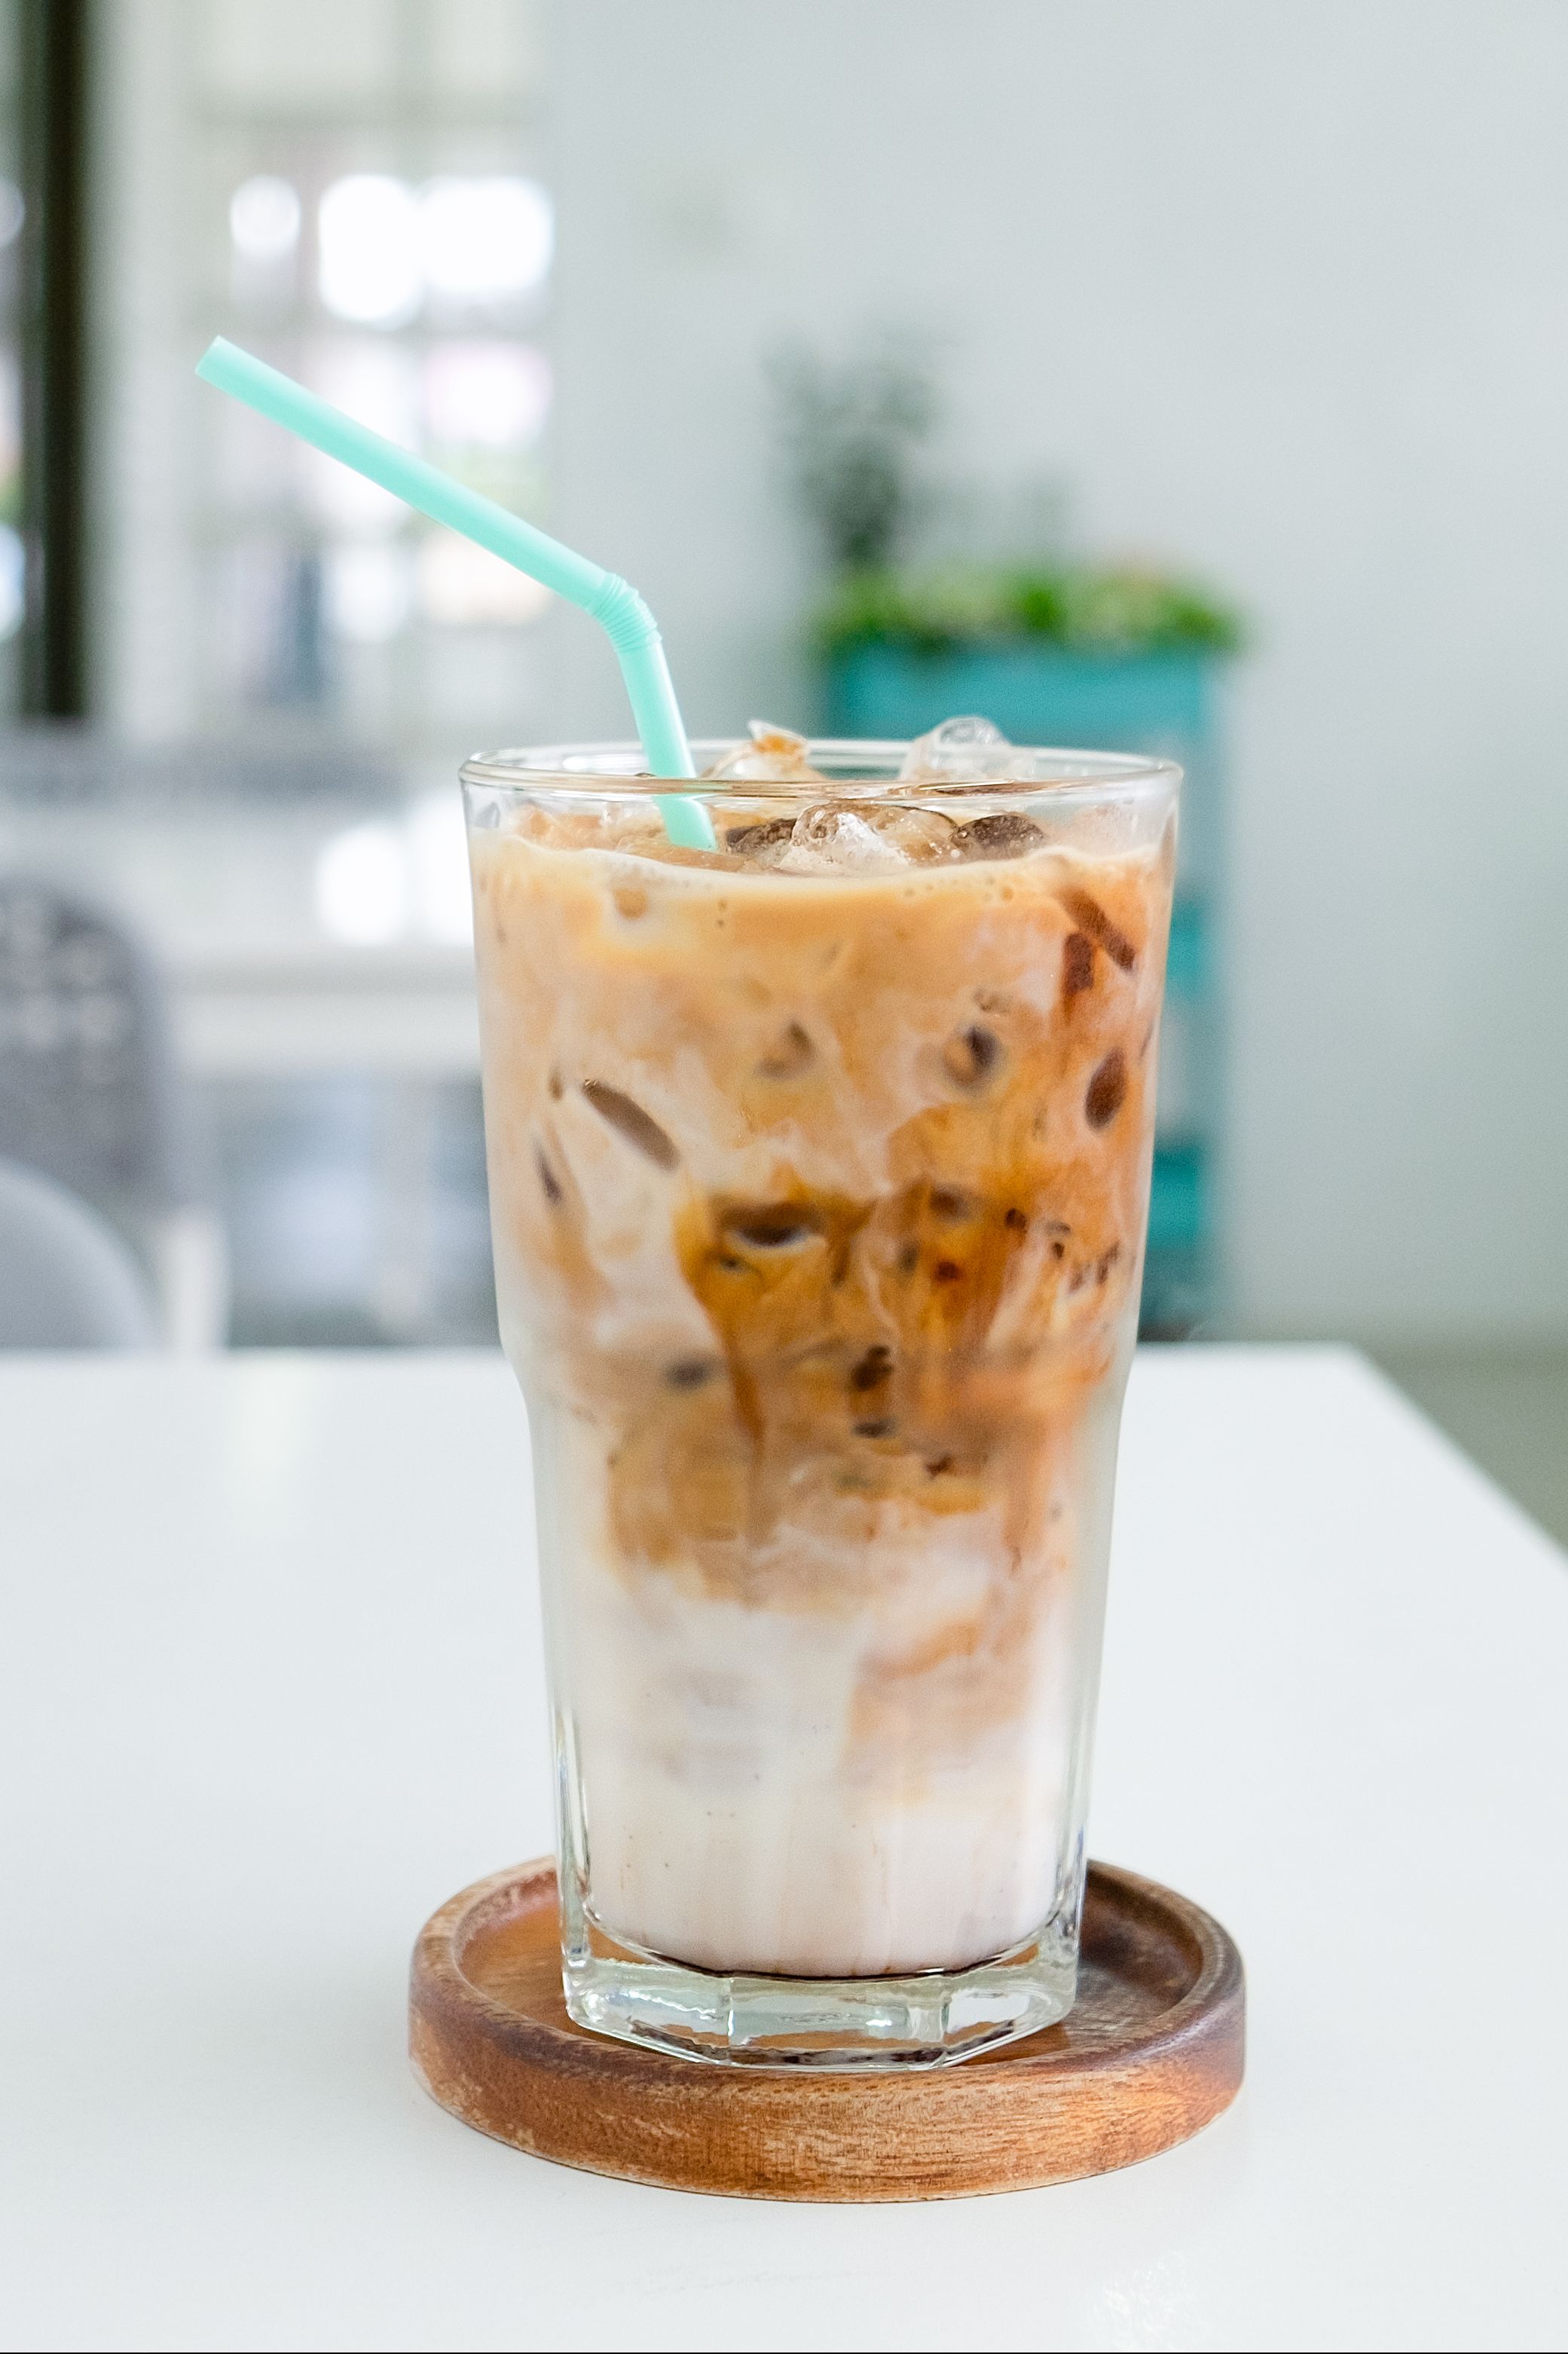 a glass of ice coffee on the white table in coffee shop